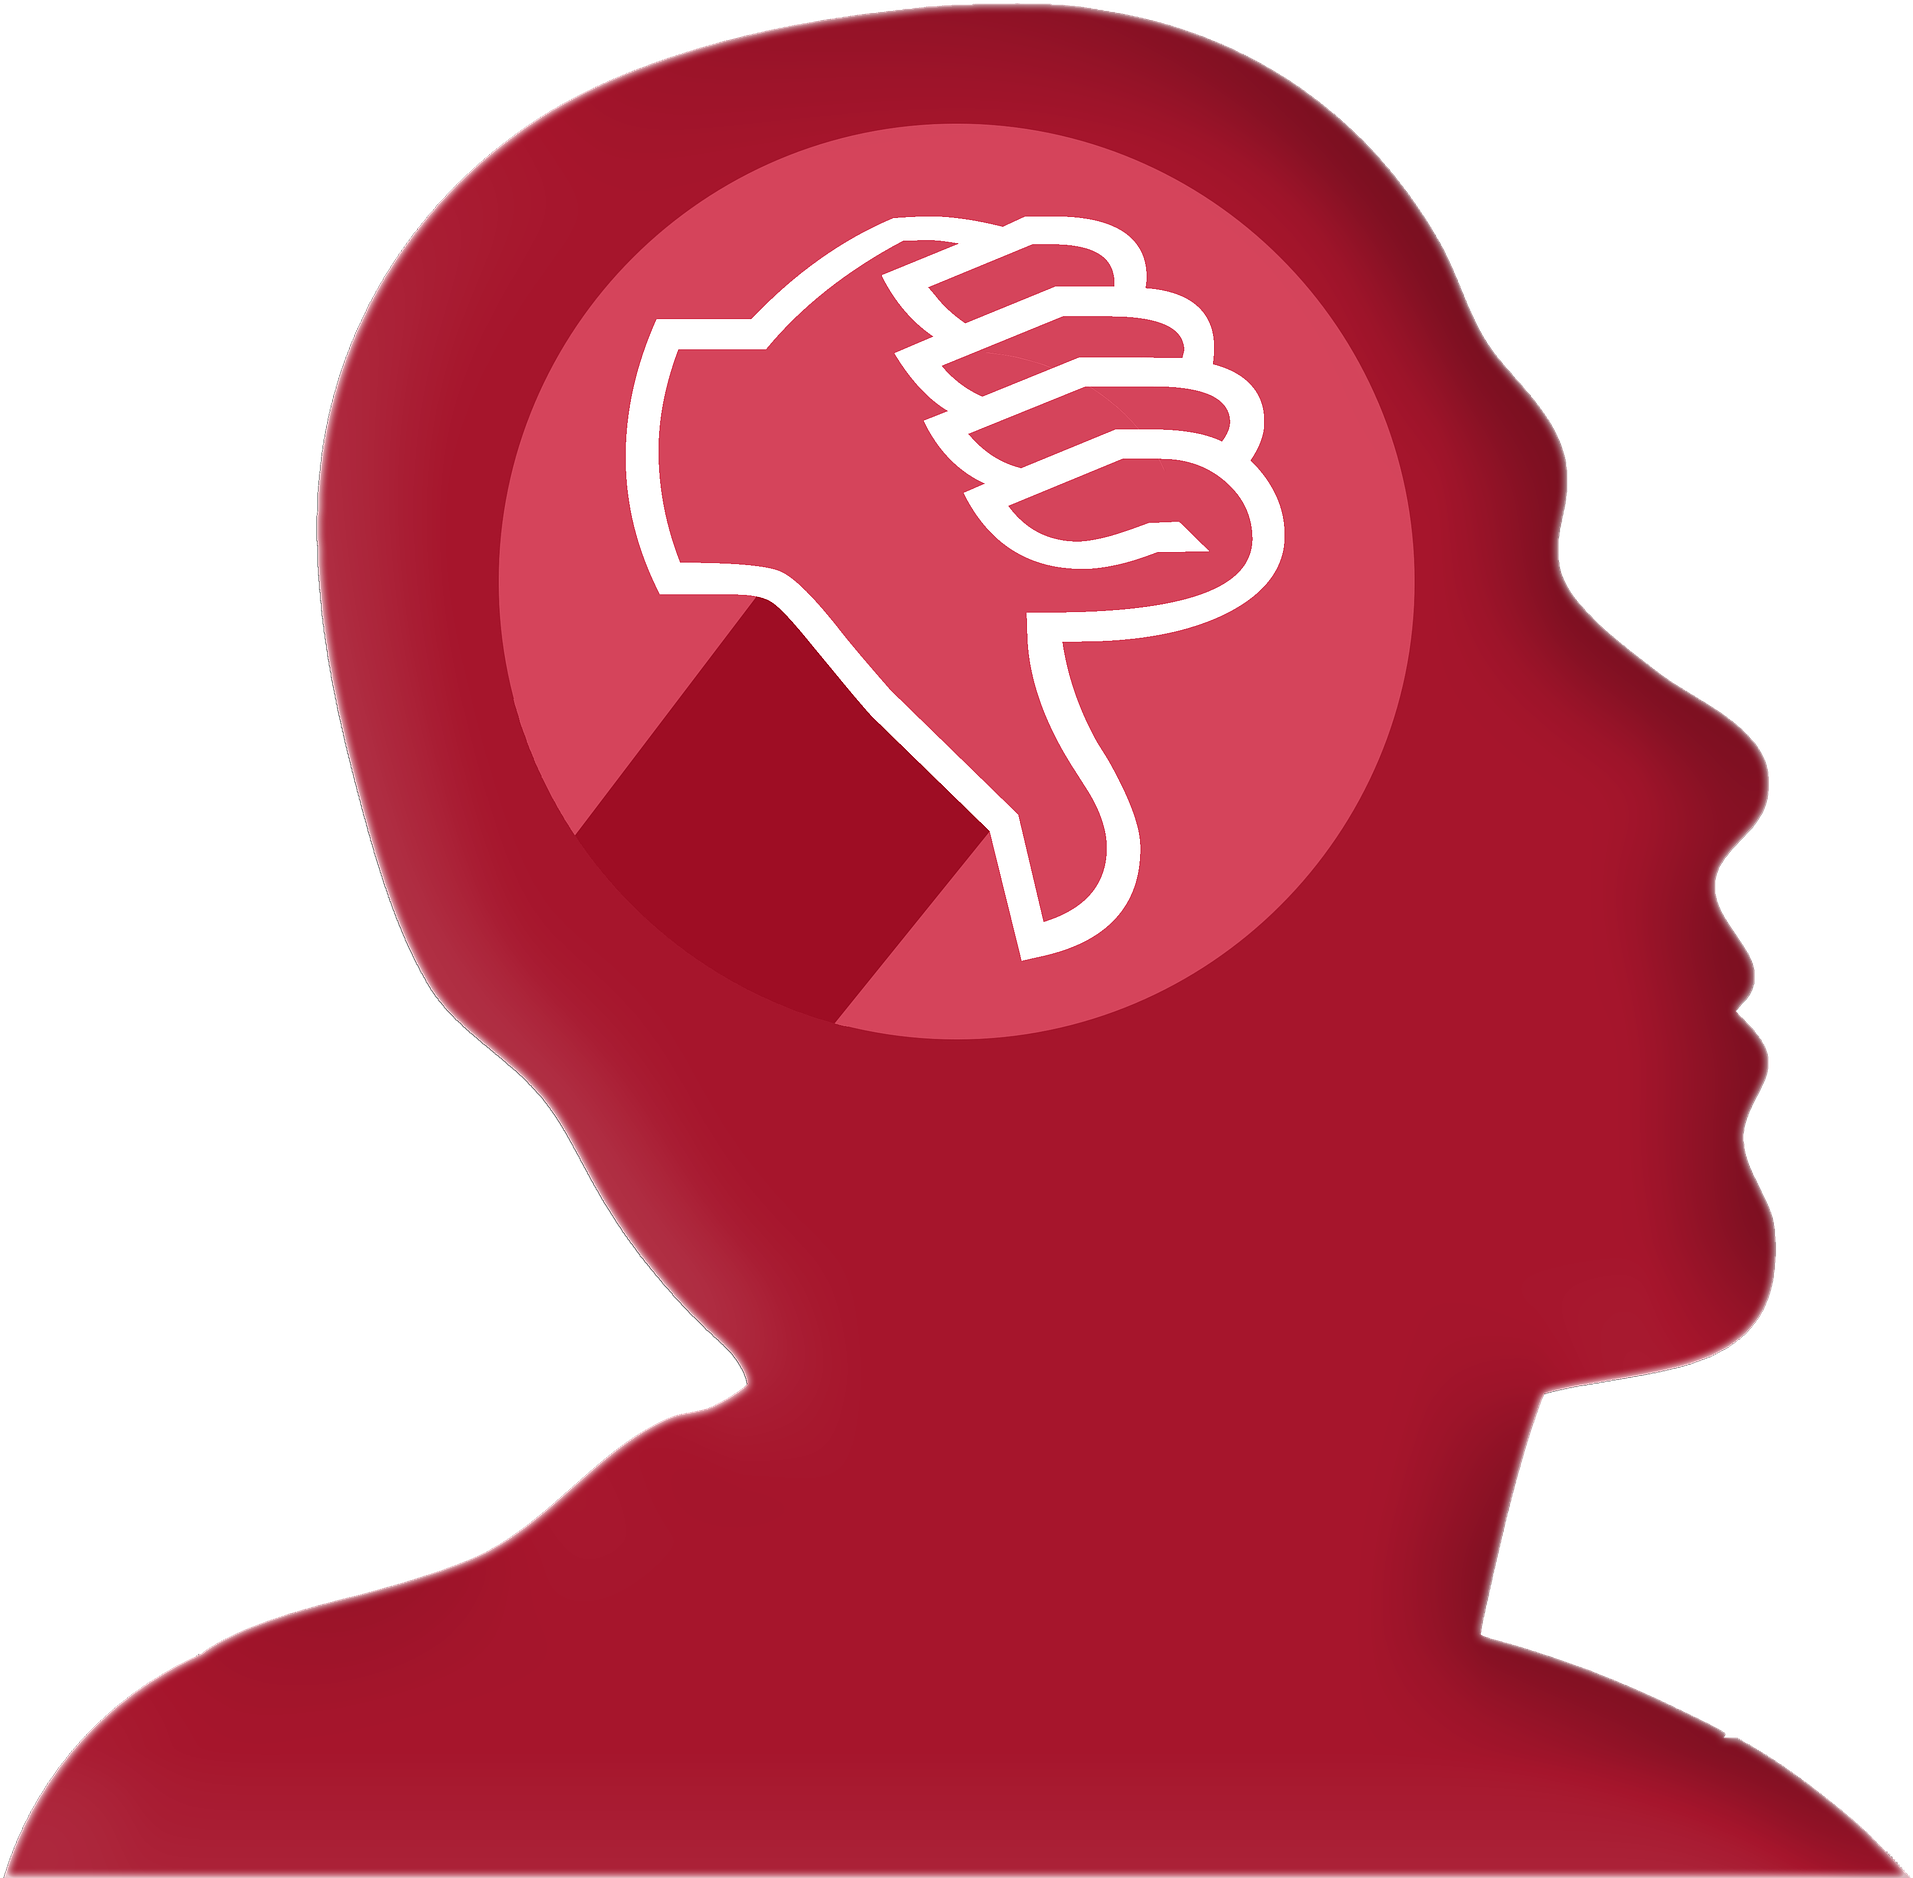 A Red Silhouette Of A Person With A Thumbs Down Symbol